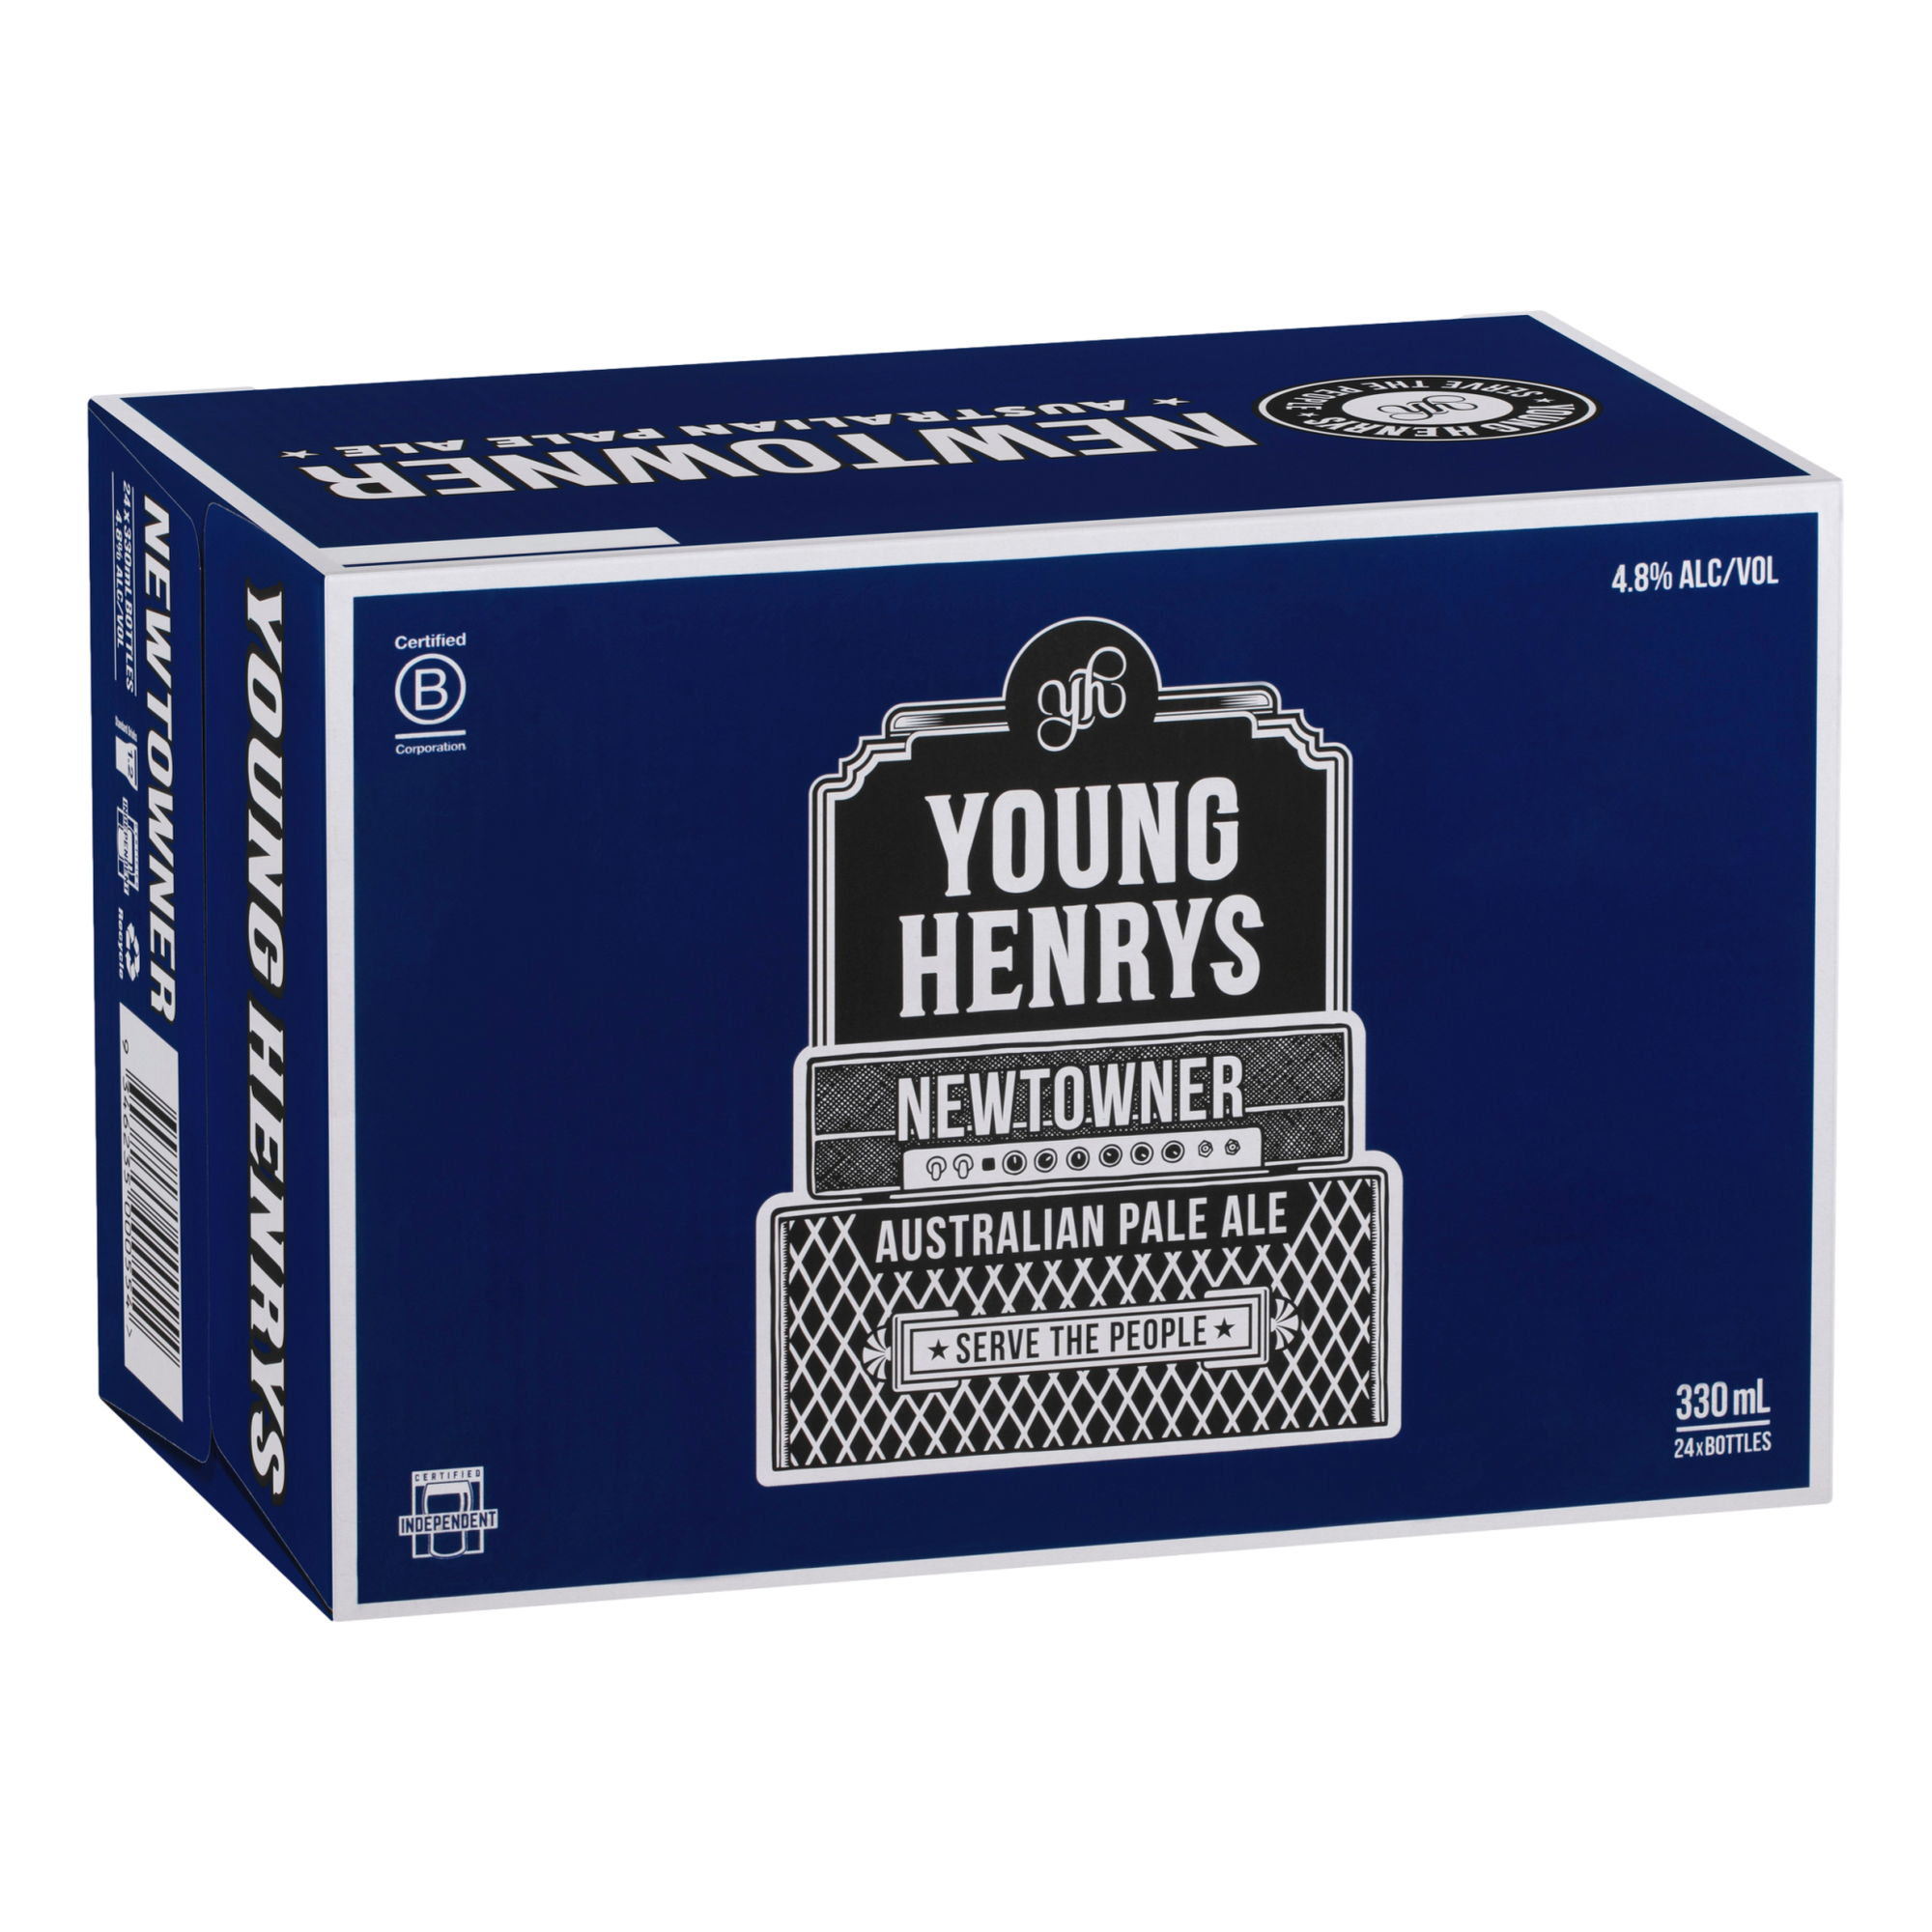 Young Henrys Newtowner Pale Ale 330ml Bottle Case of 24